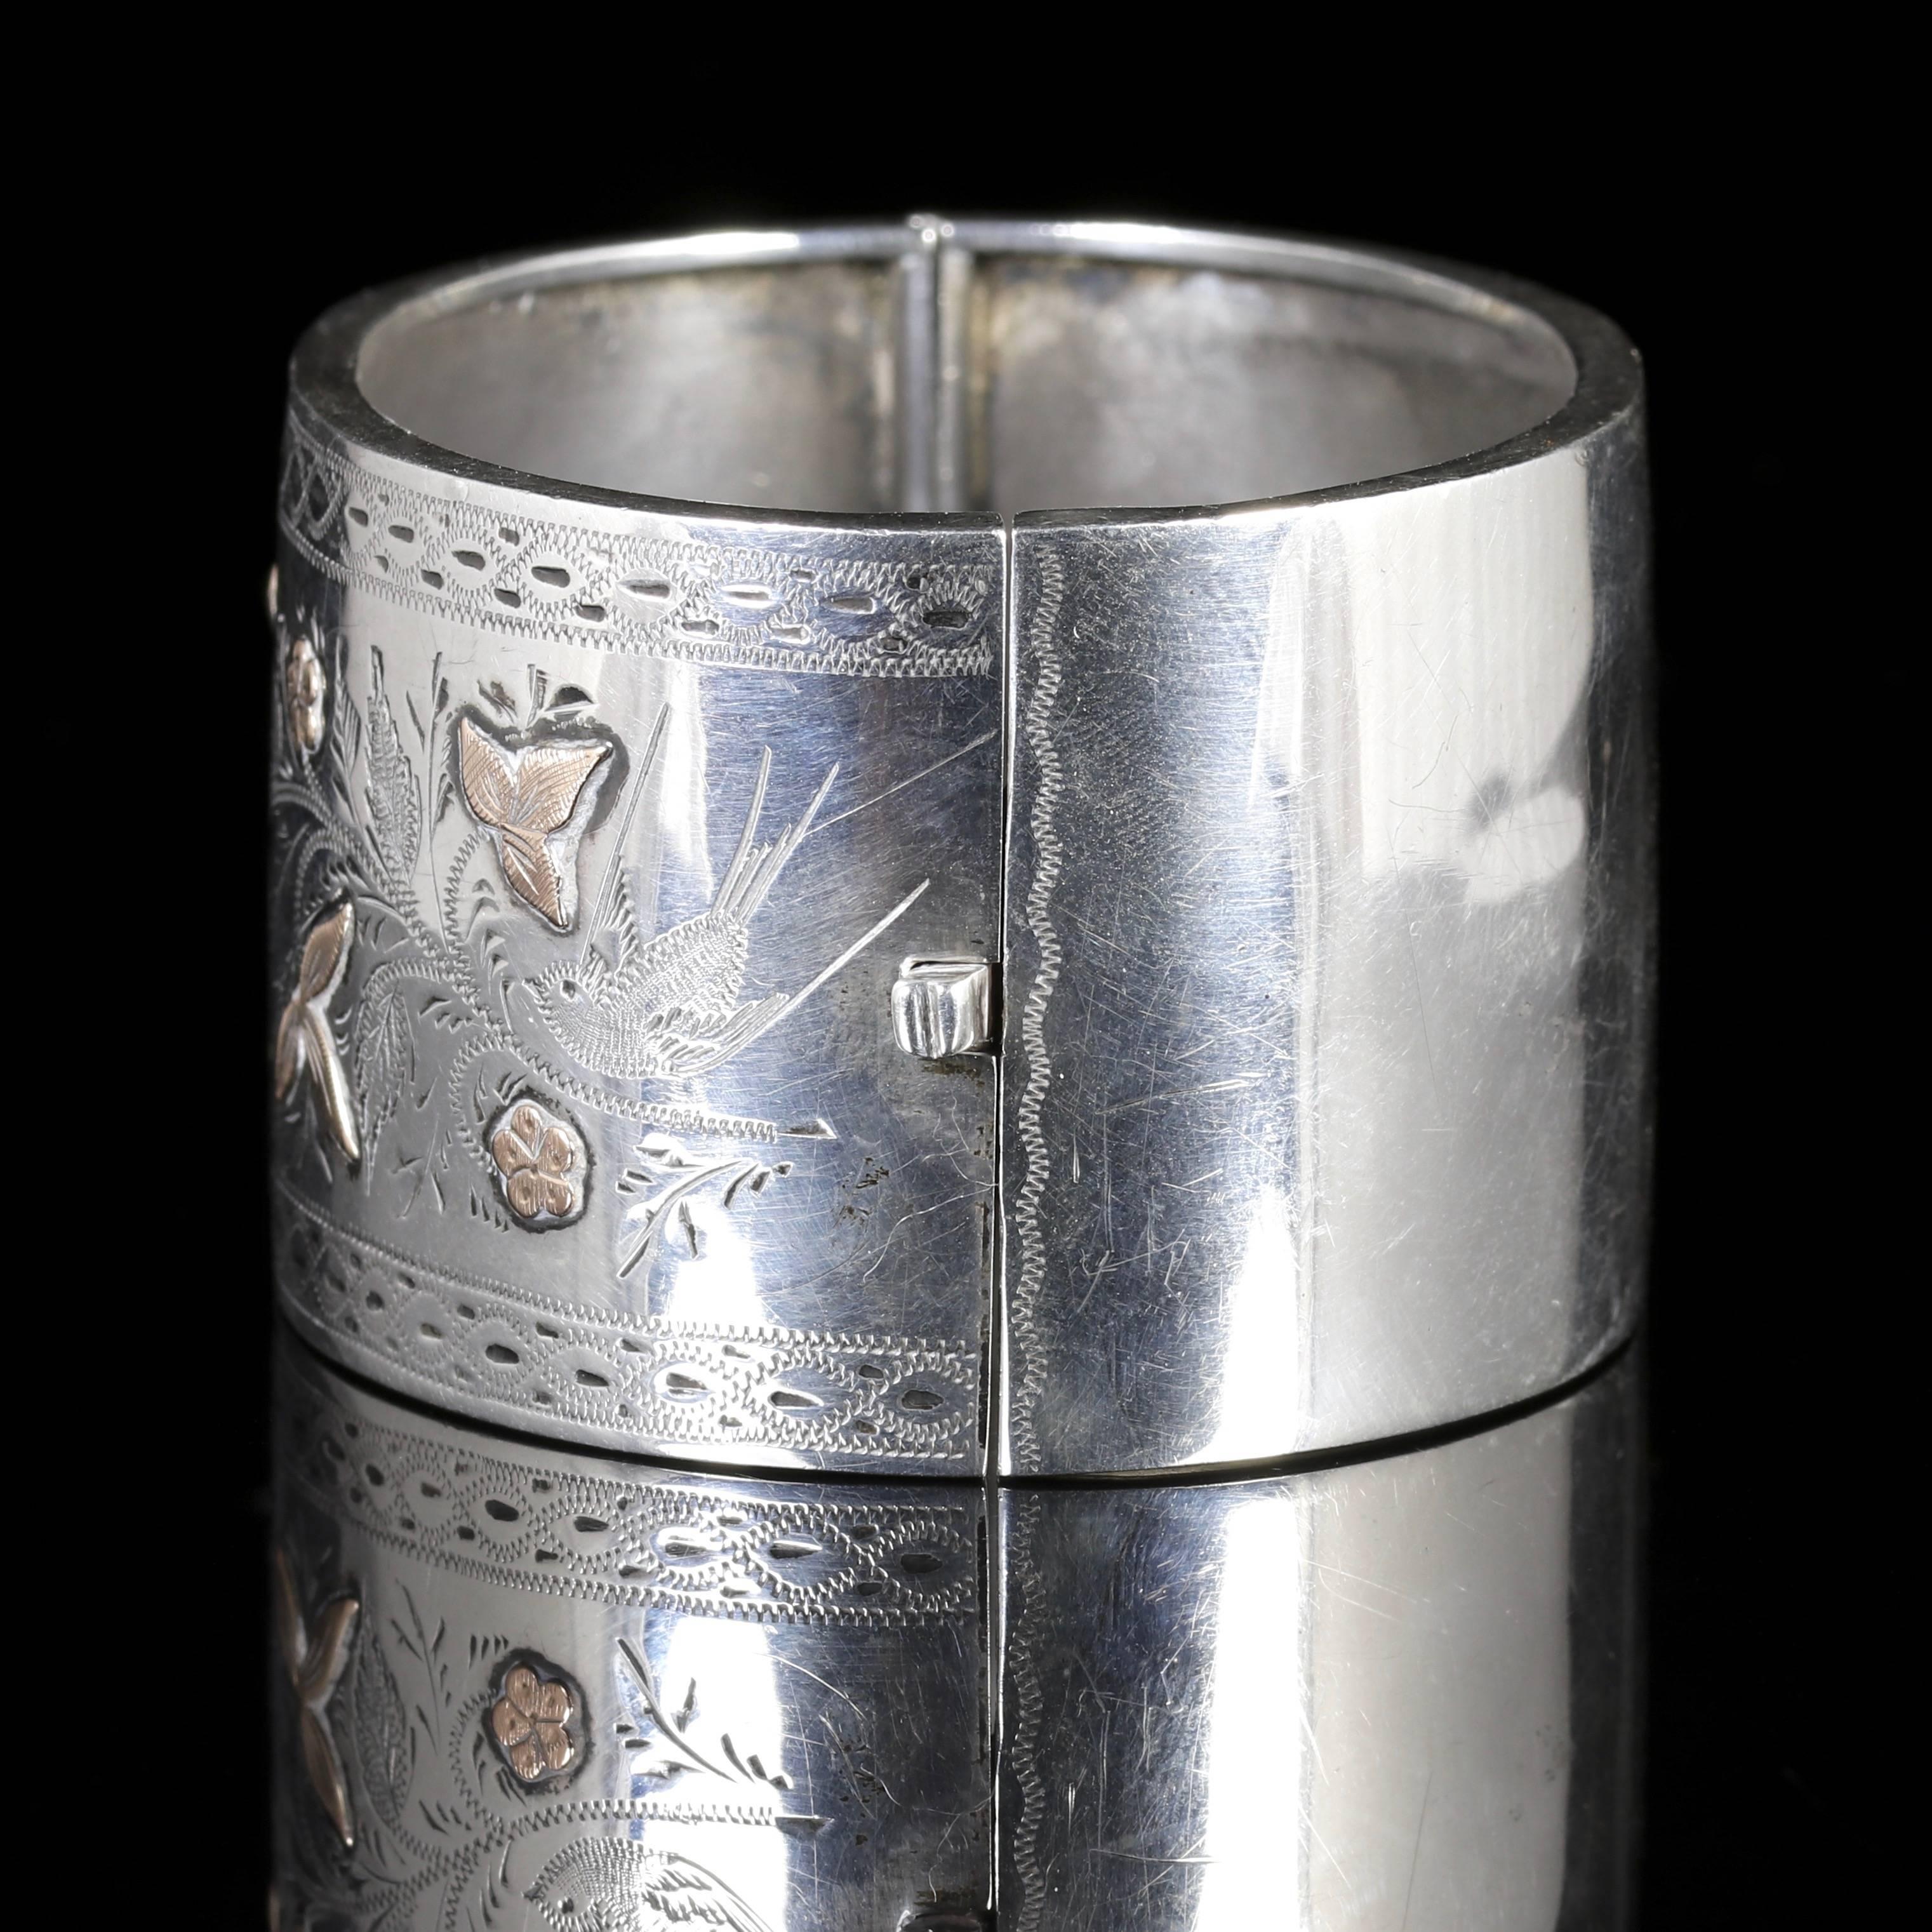 This fabulous Victorian Sterling Silver and Gold  bangle is exceptional.

The beautiful bangle depicts a butterfly and bird in flight among foliate motifs in Silver and Gold.

Forget me nots and Ivy can be seen upon the face of the bangle.